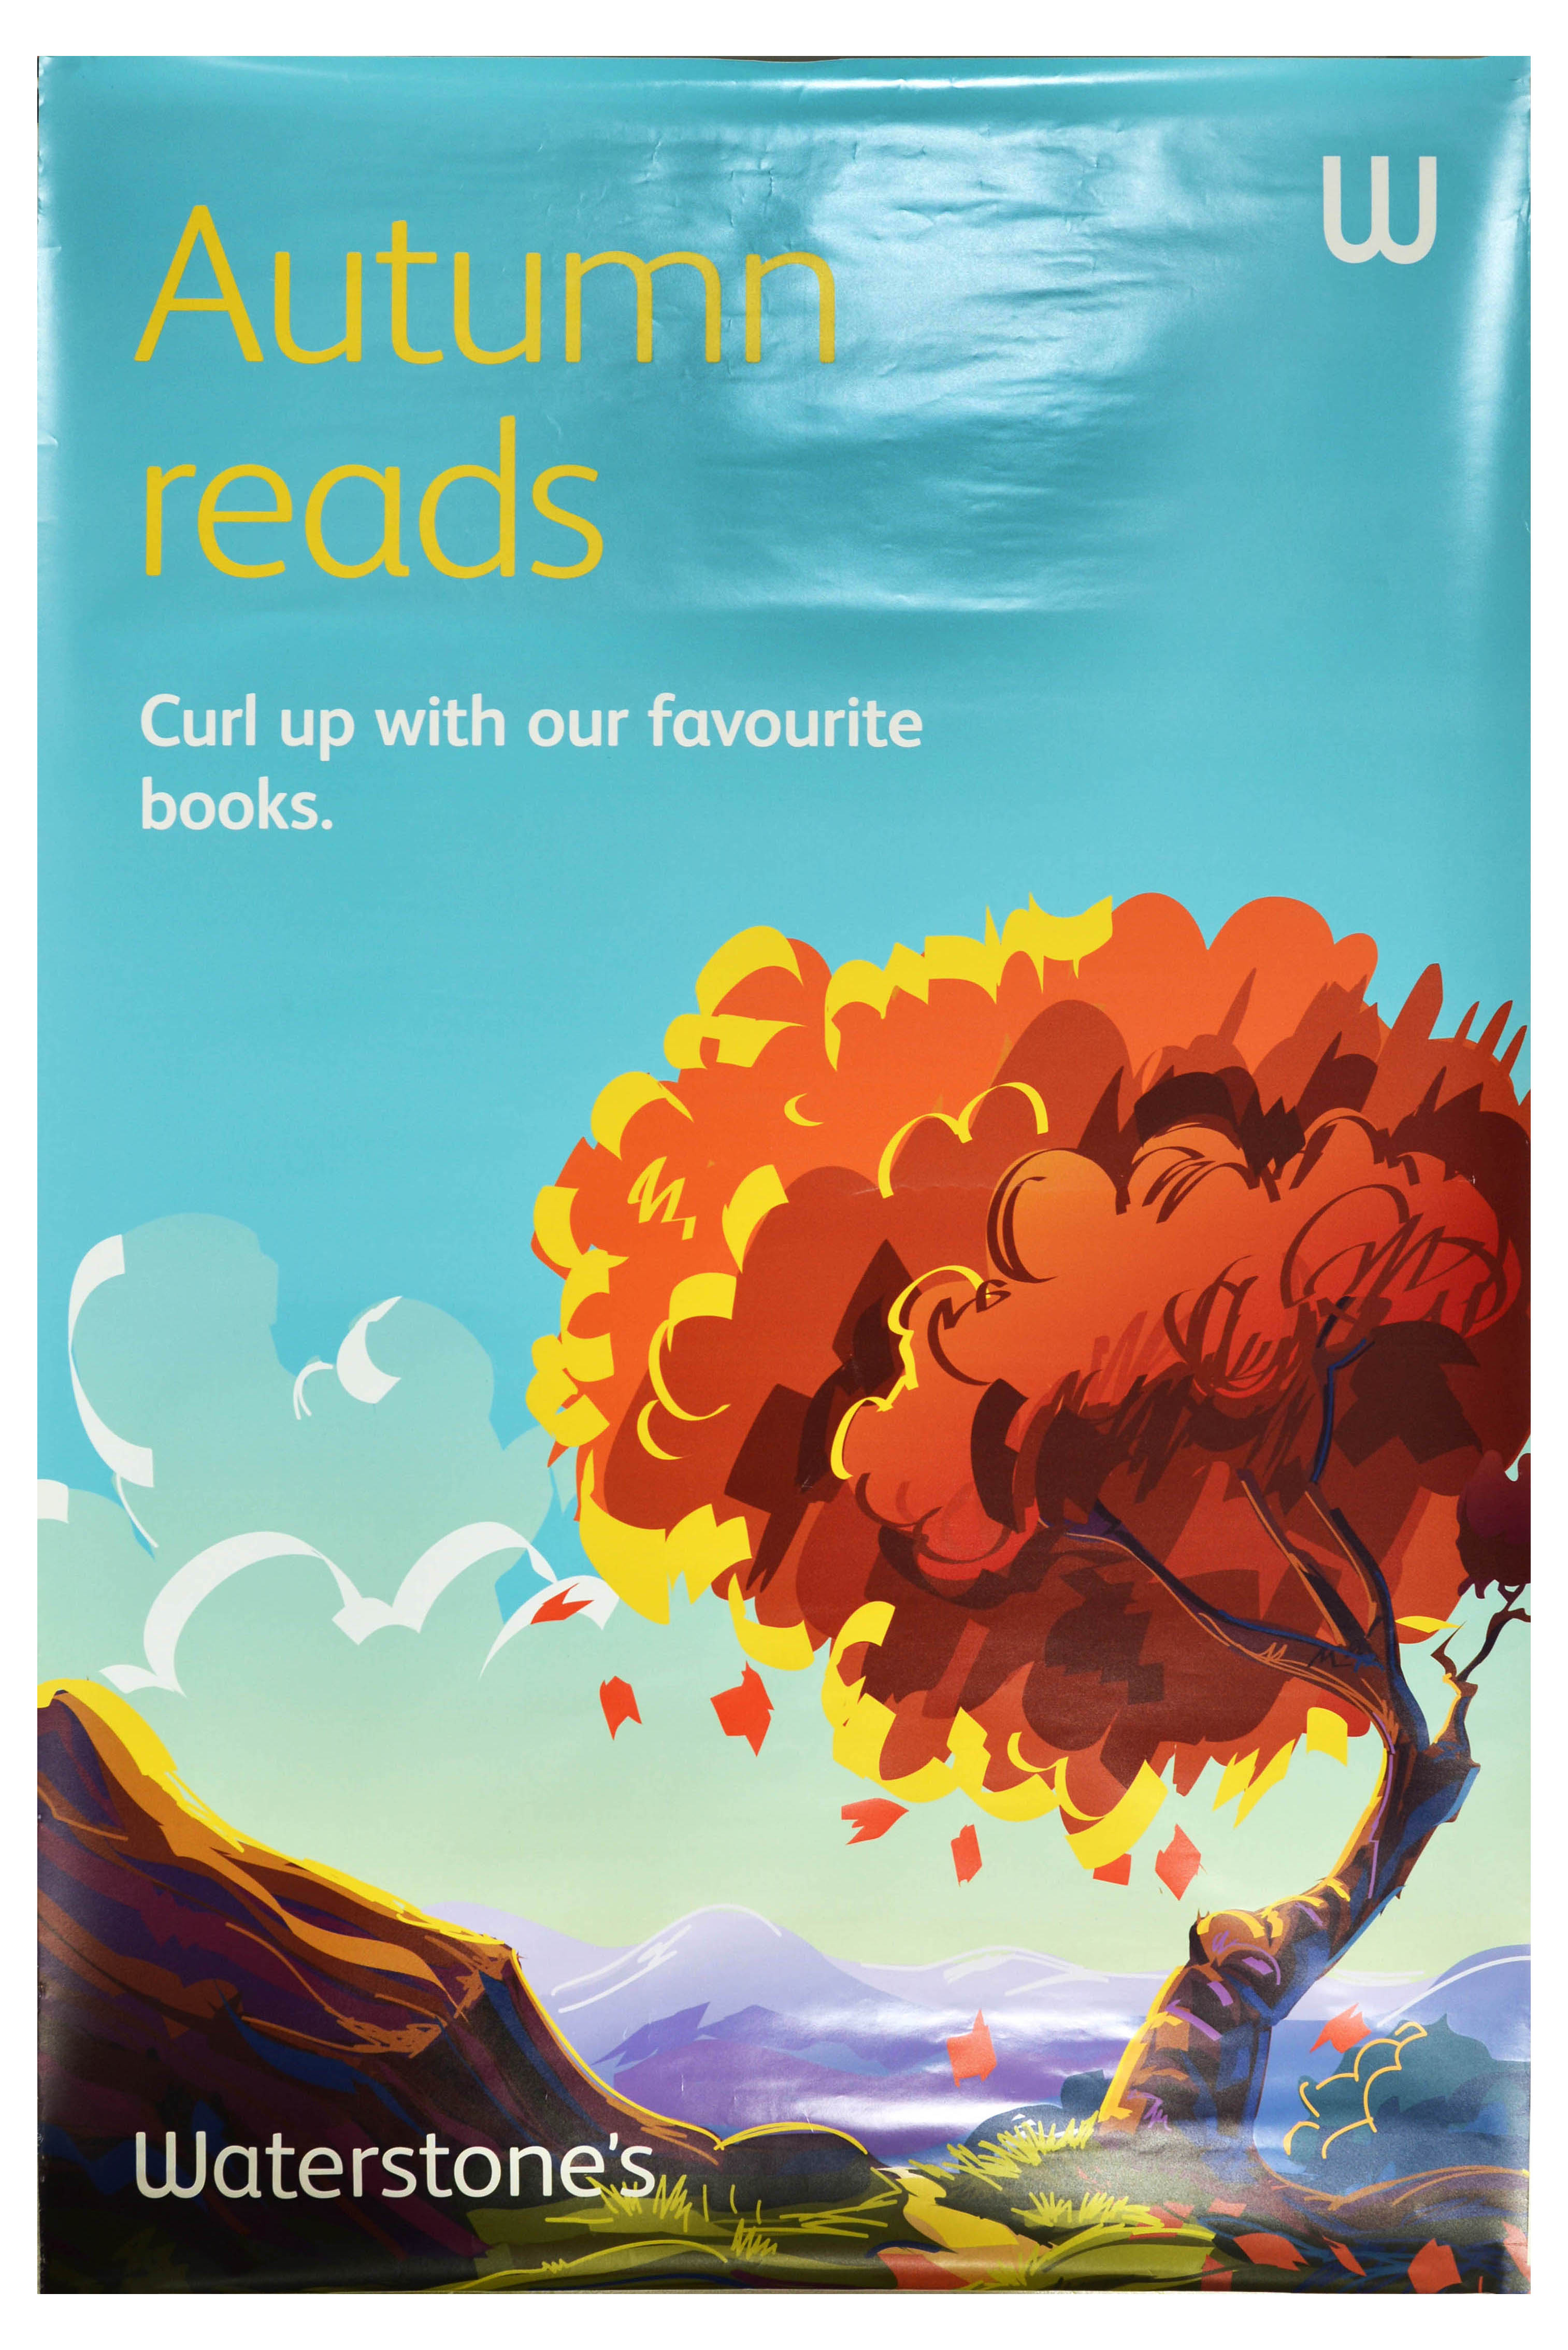 Advertising Poster Waterstones Autumn Reads Favourite Books Book Store